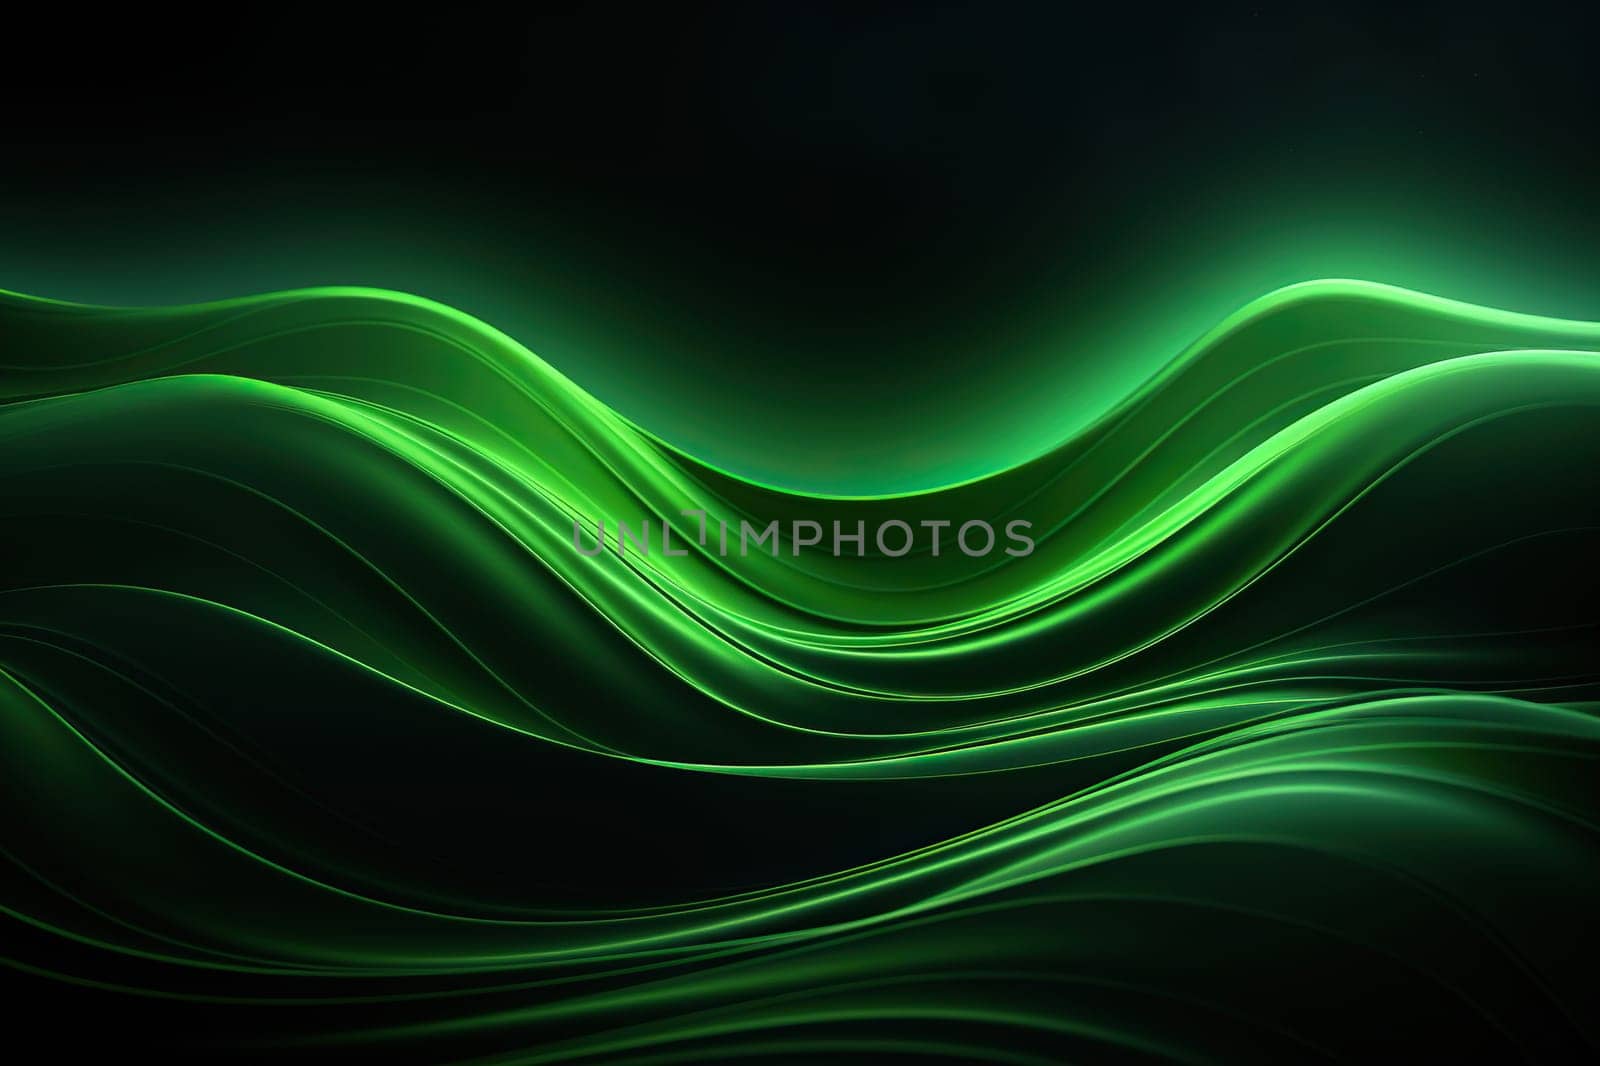 Horizontal background with abstract green waves.